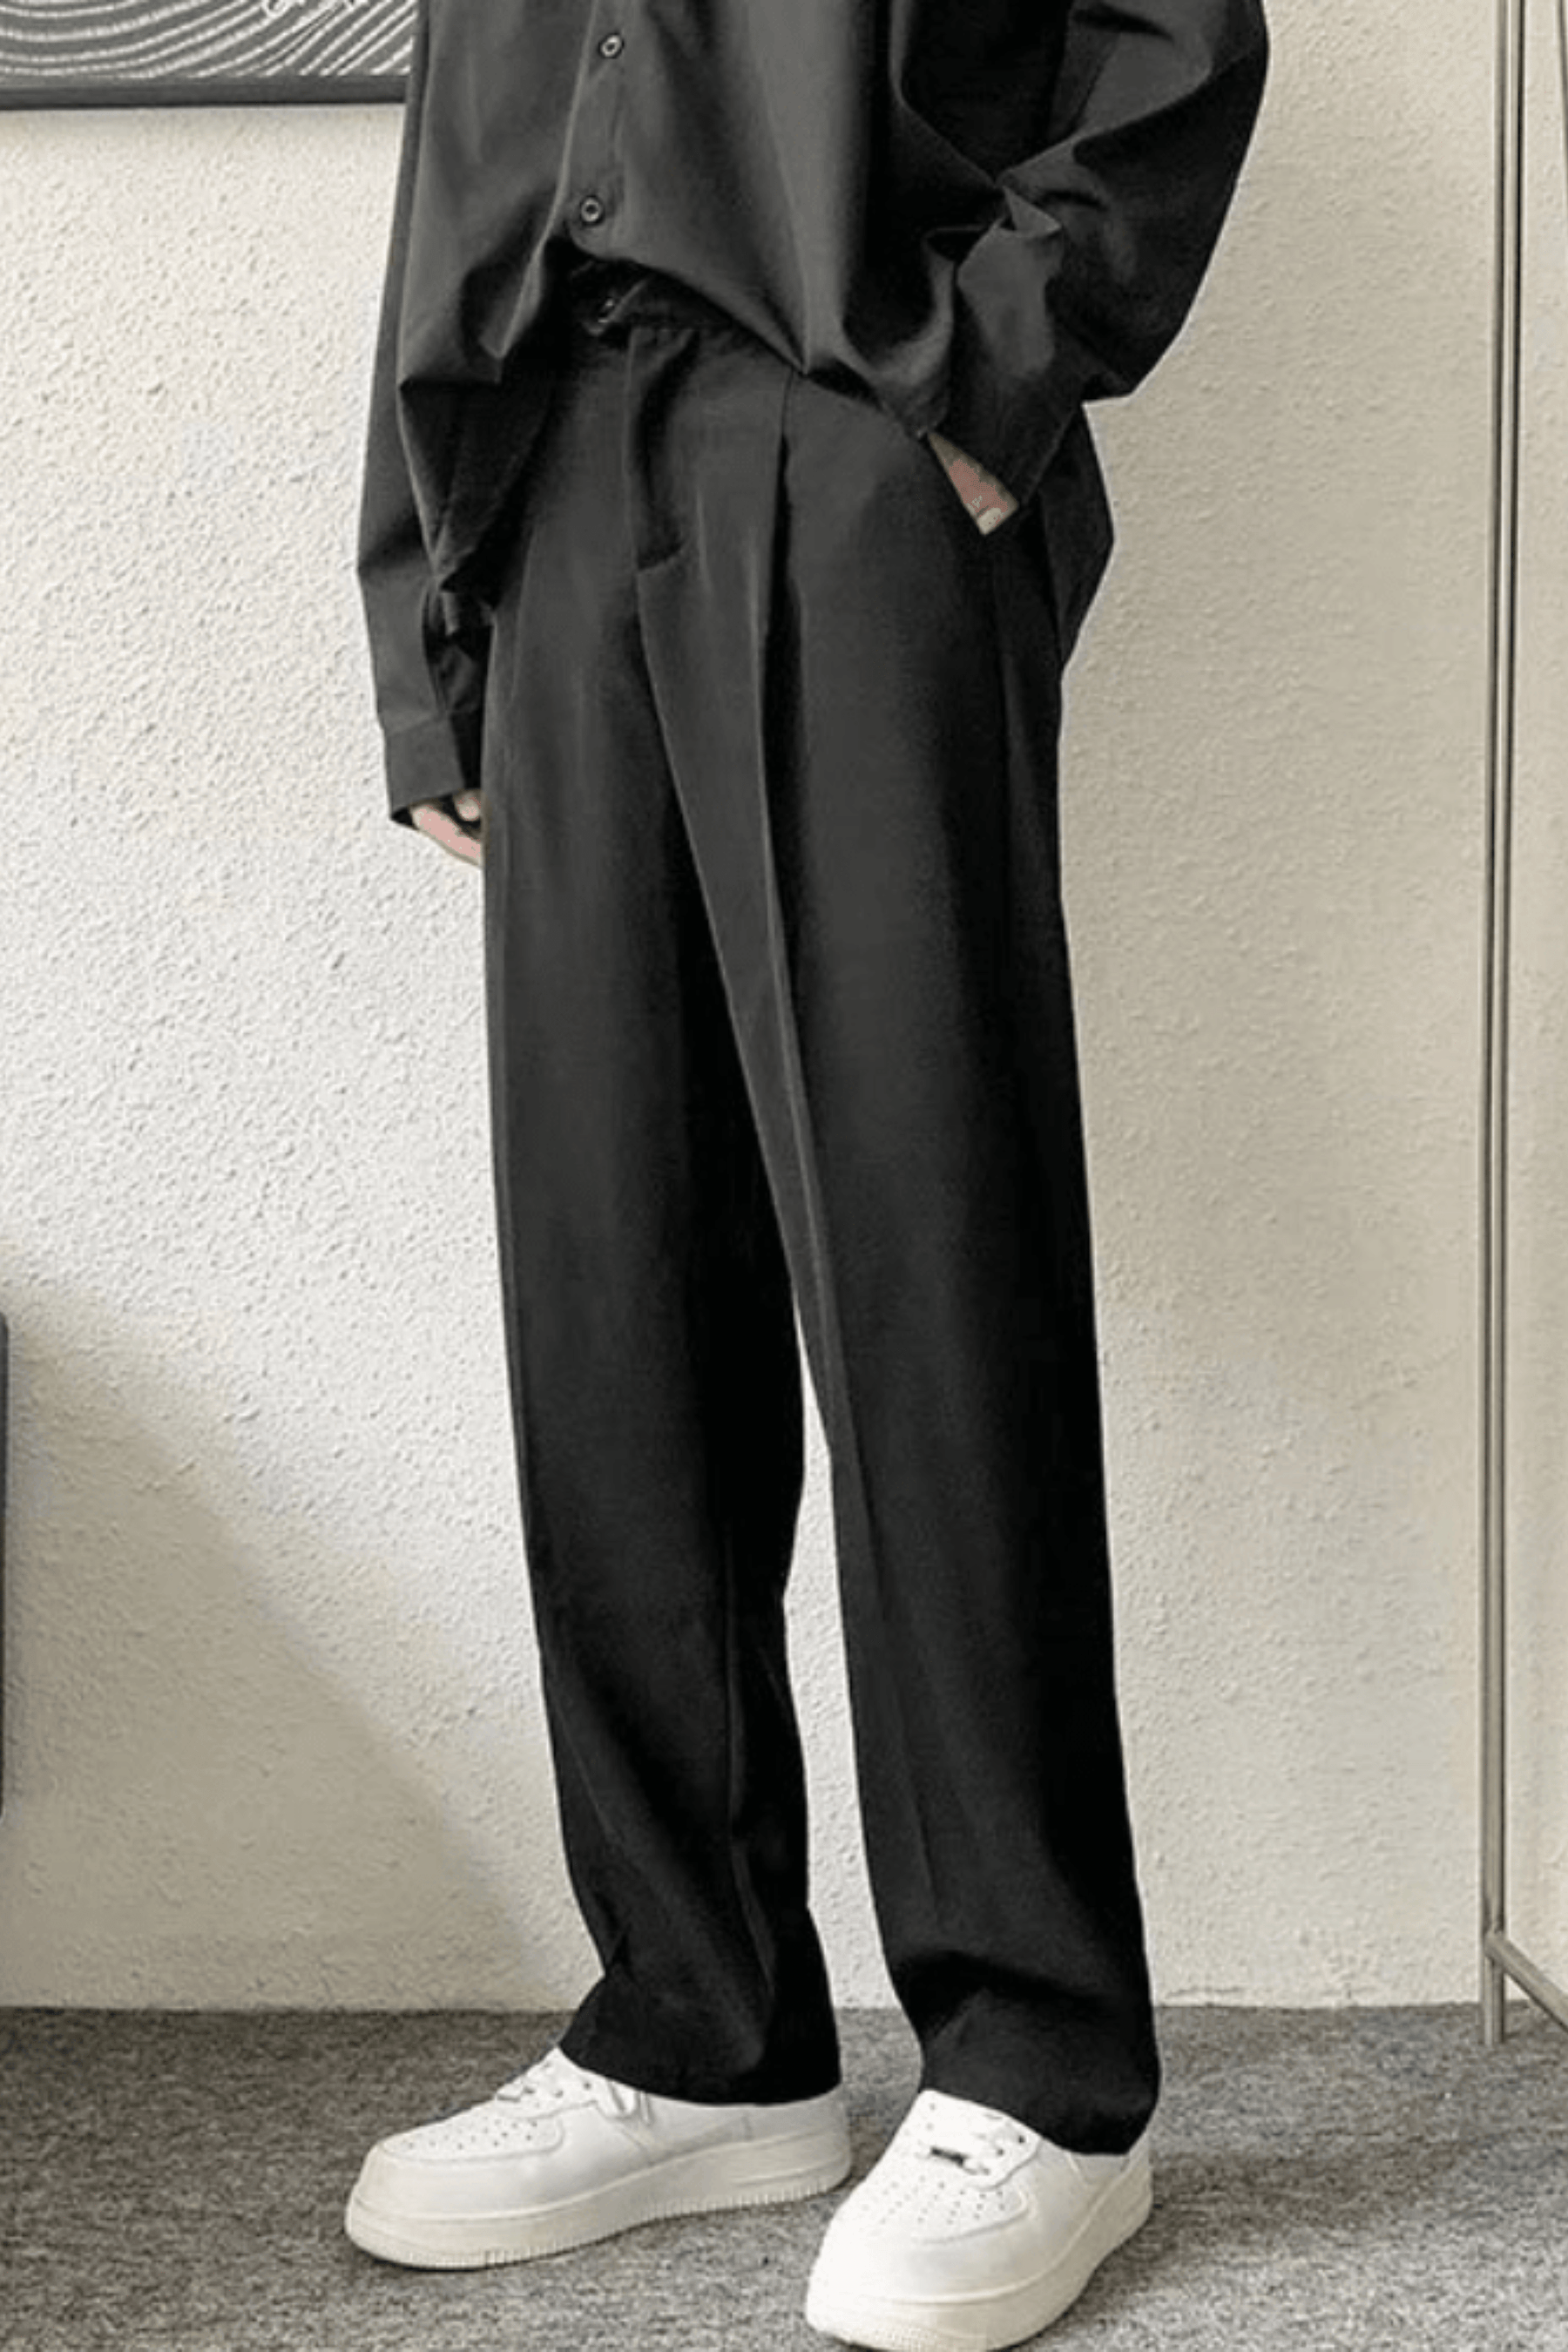 Alessandro Toscani™ ENZO™ | Men's Pants with Pleat